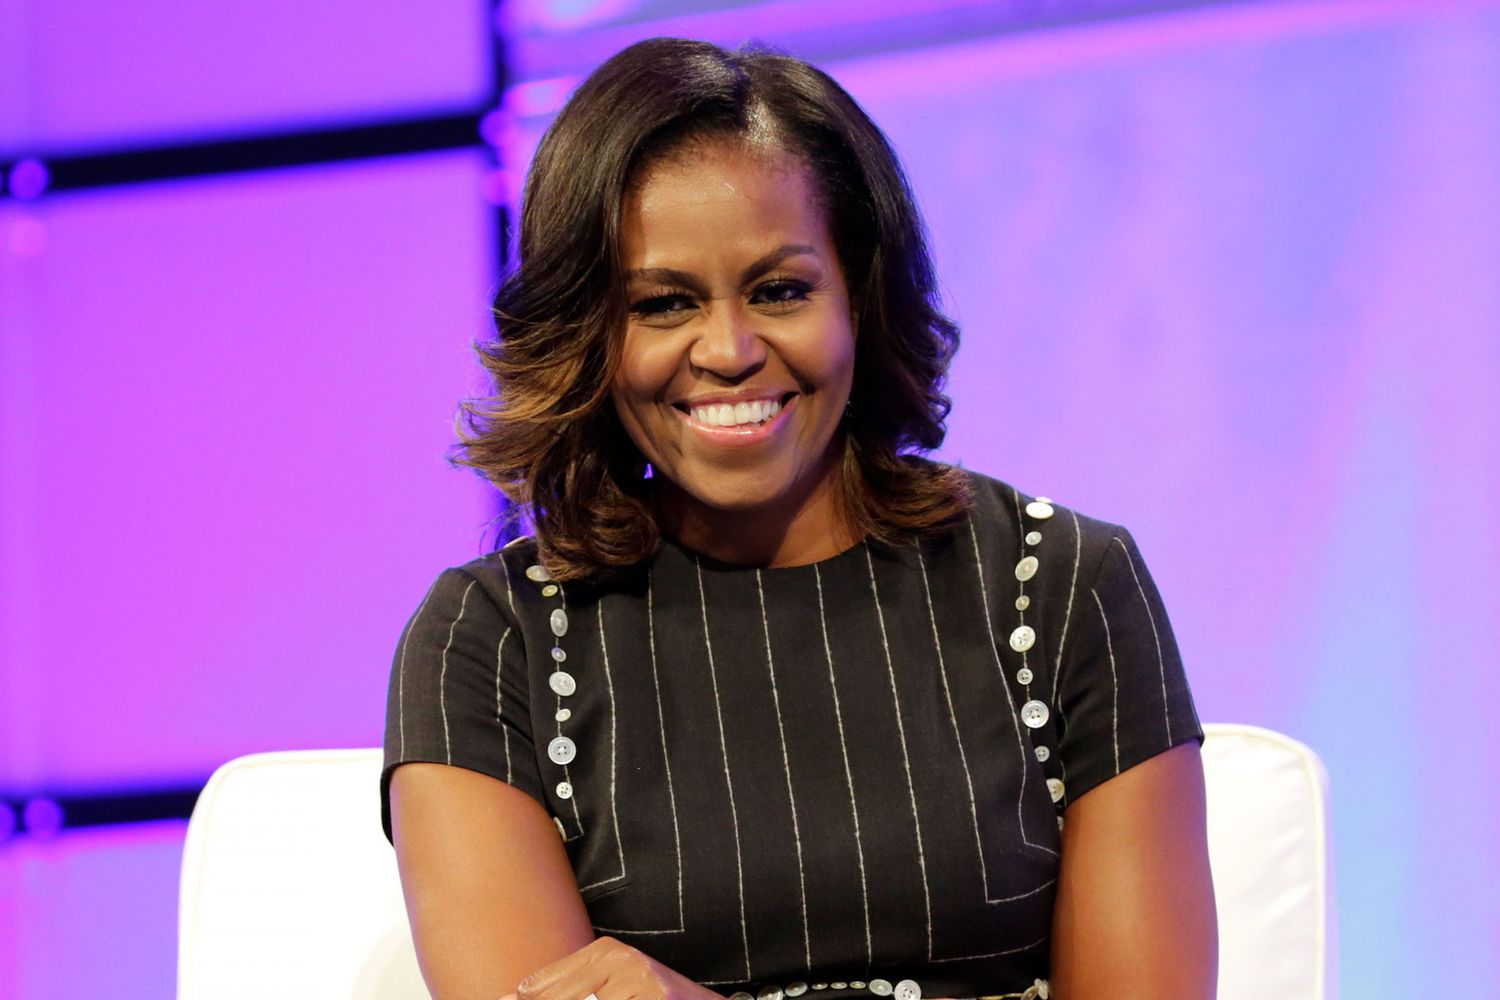 Michelle Obama Sets Ambitious Goal to Register a Million Voters Ahead of 2022 Midterm Elections